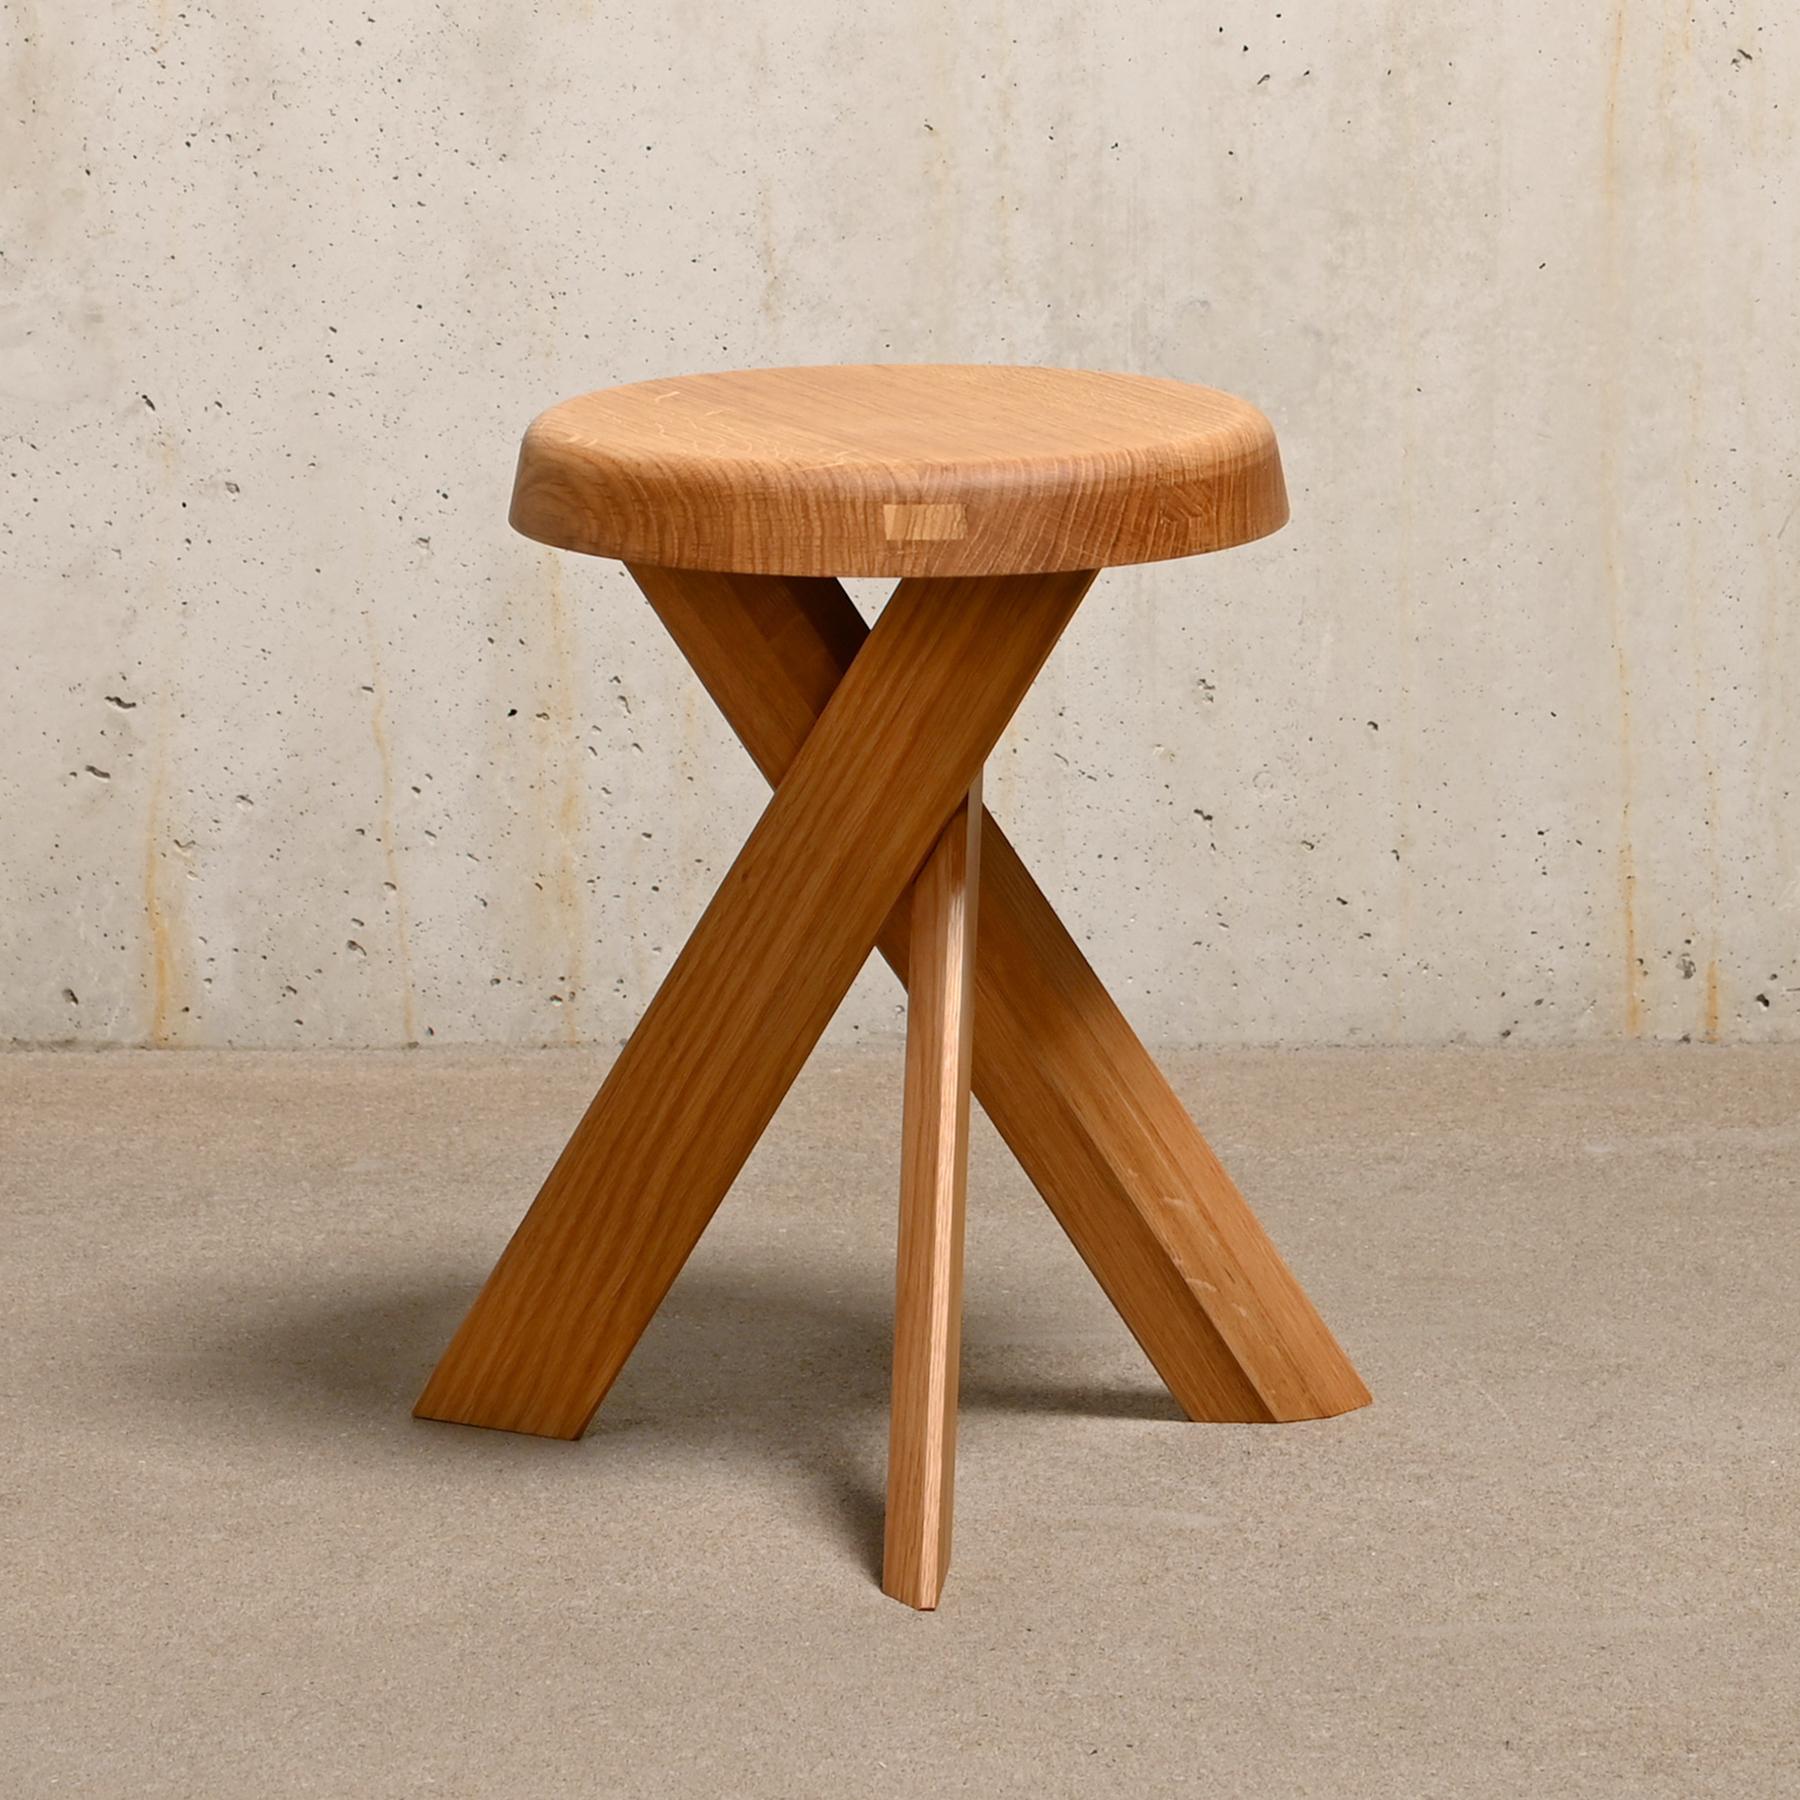 Stool S31 (model A) designed by Pierre Chapo around 1960 and manufactured by Chapo Création in France, 2024. Solid Oak finished in naturel oil. Excellent original condition and signed by manufacture stamp.

The wood drawing and grain of the stool